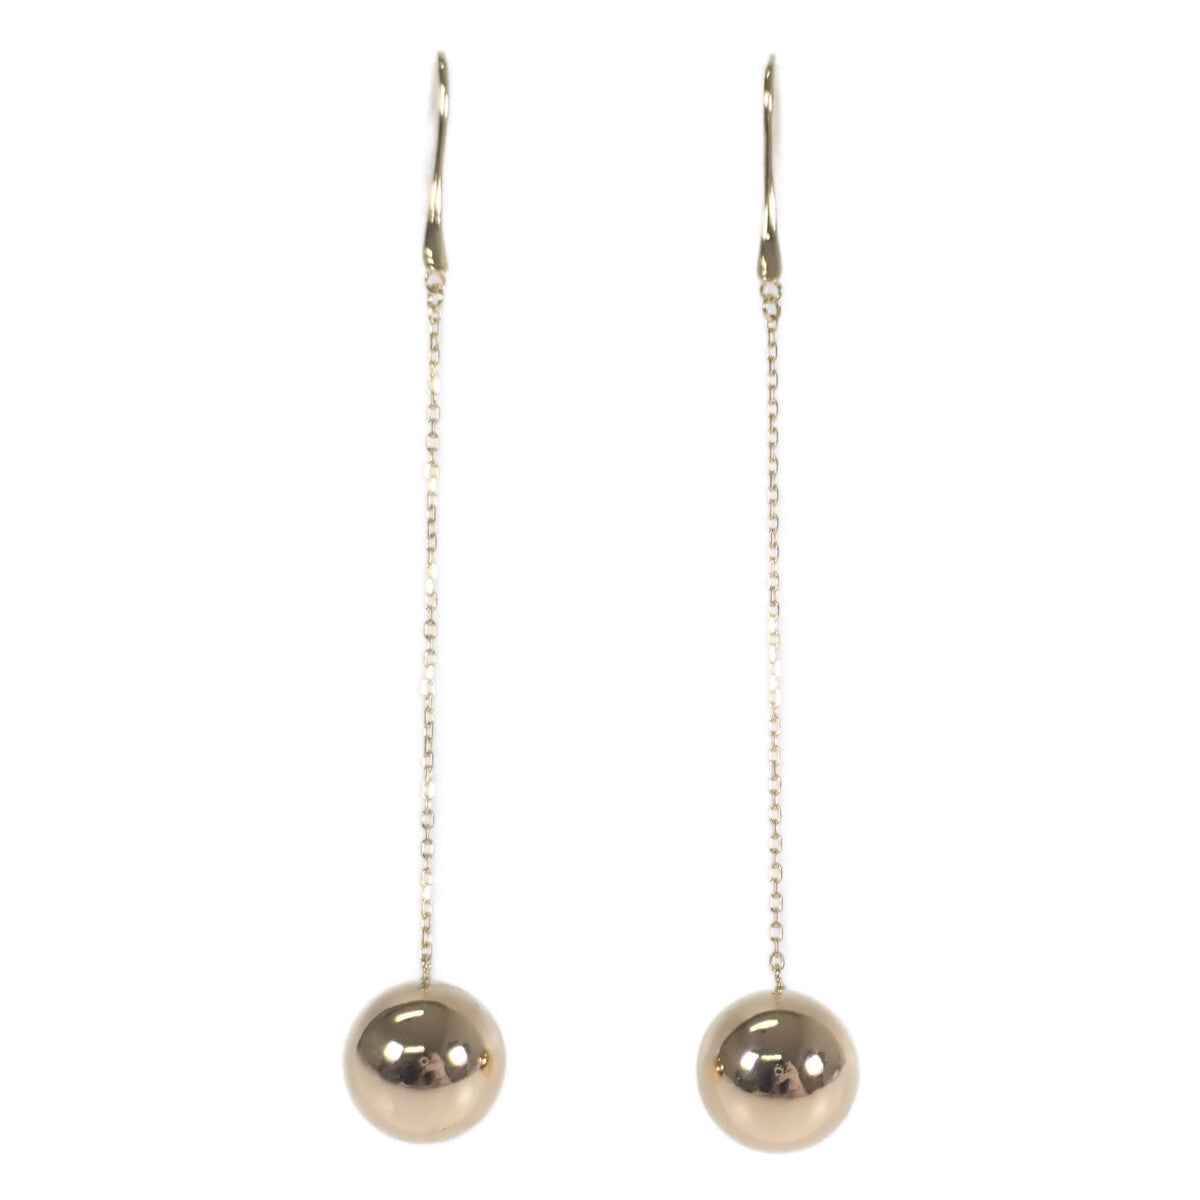 [LuxUness]  Ladies' K18YG Long Ball Design Gold Earrings – Used in Excellent condition